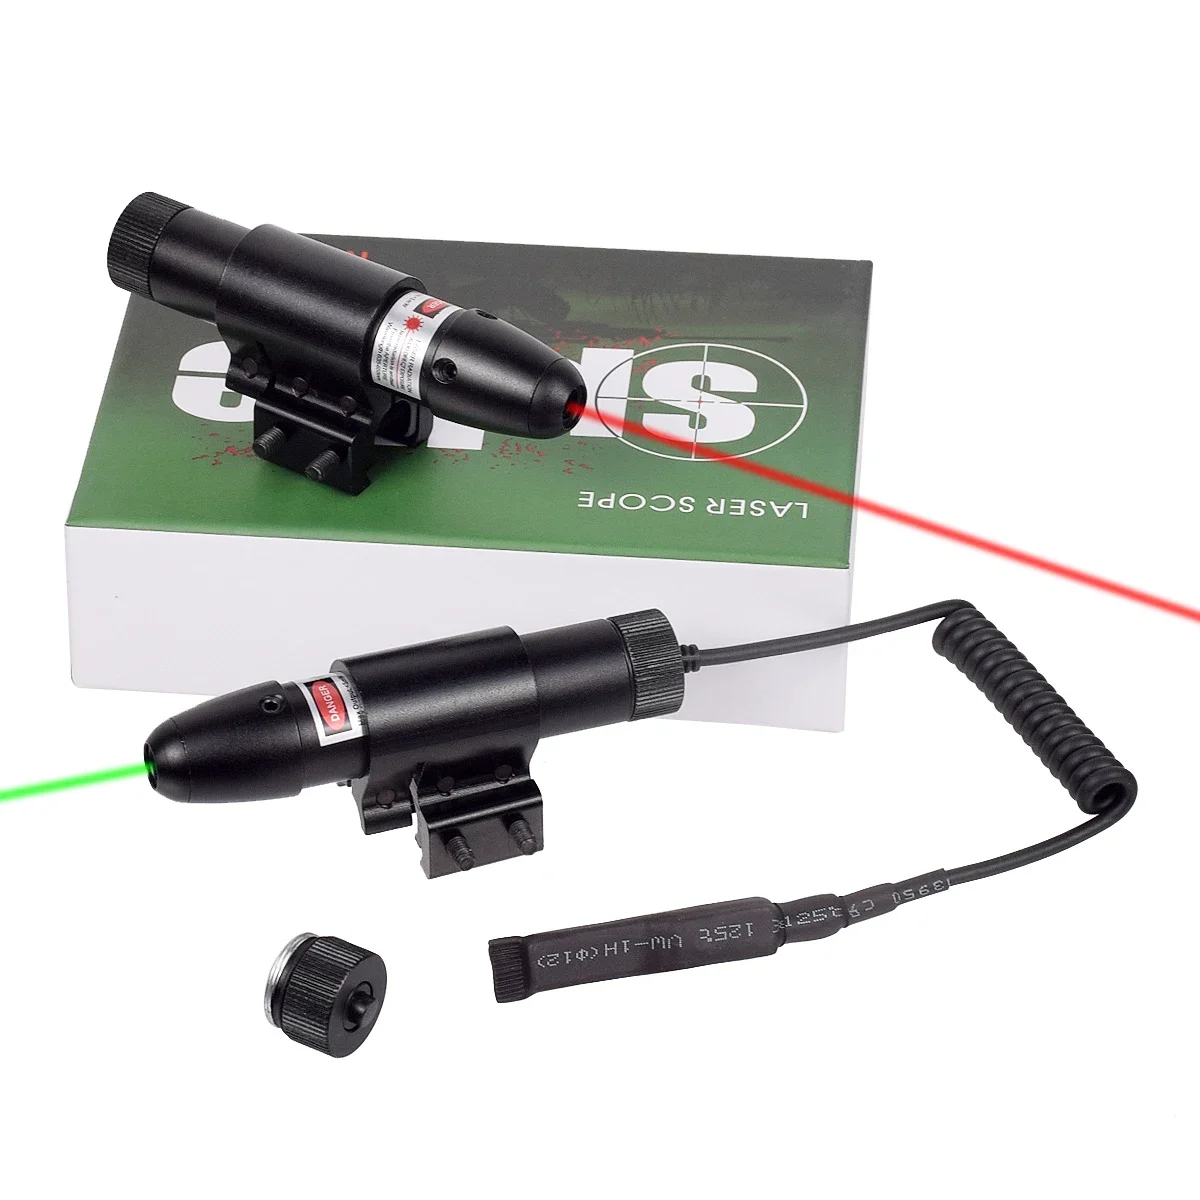 

Tactical Red Green Dot Laser Sight For 11mm/20mm Rail Picatinny Mount With Remote Switch For Airsoft Rifle Hunting Scope